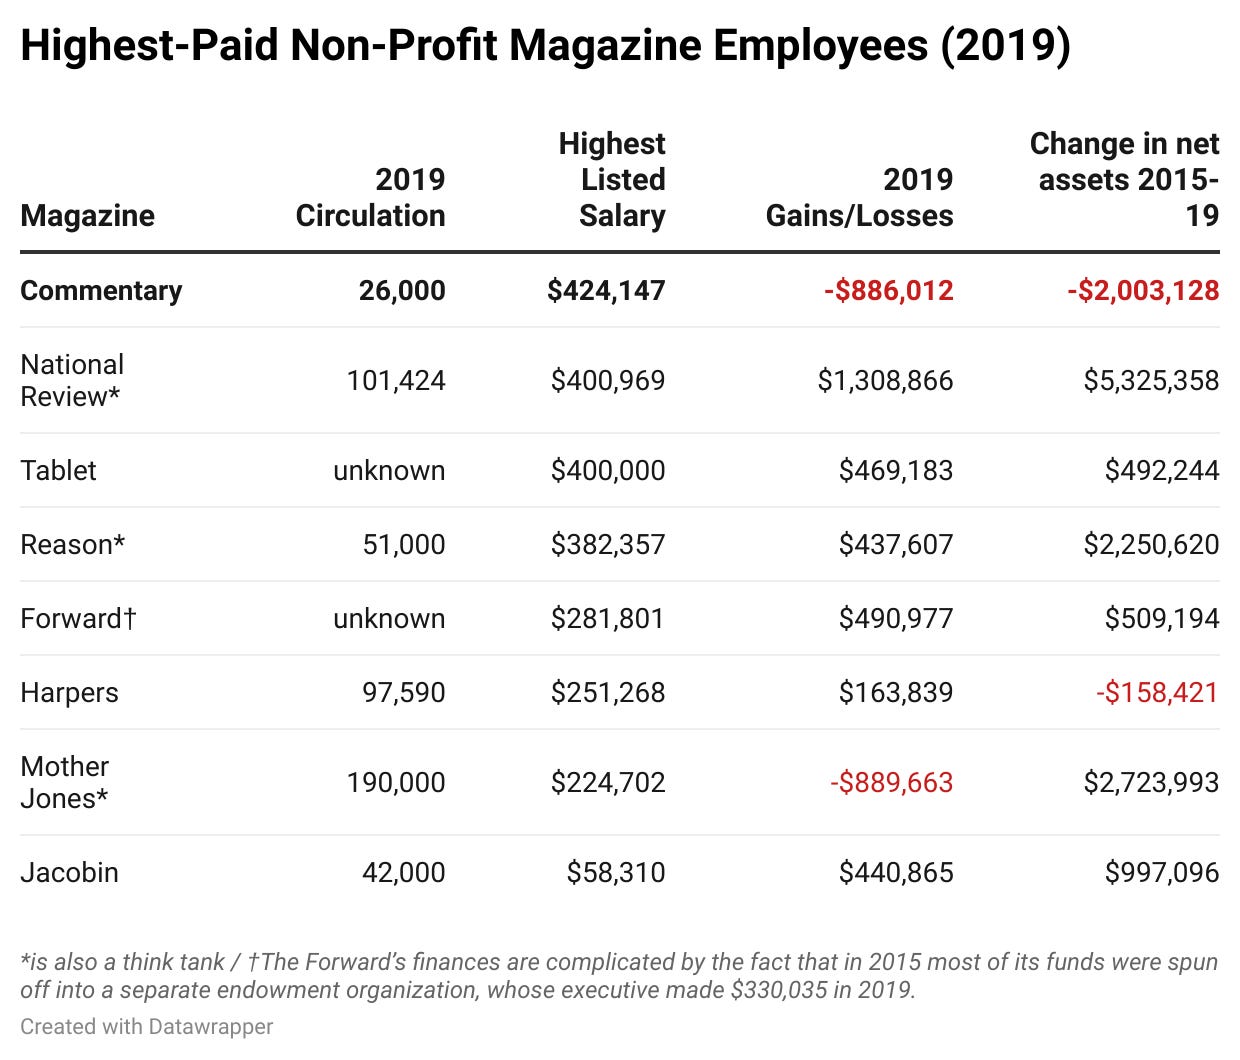 Chart of Highest-Paid Non-Profit Magazine Employees, 2019, via Dan Stone’s post. The really notable numbers are Commentary’s John Podhoretz who made an astounding $424,147 while his magazine lost $886,012 and had assets that declined by over 2 million dollars from 2015 to 2019, while Jacobin’s highest salary is a very socialist $58,310.